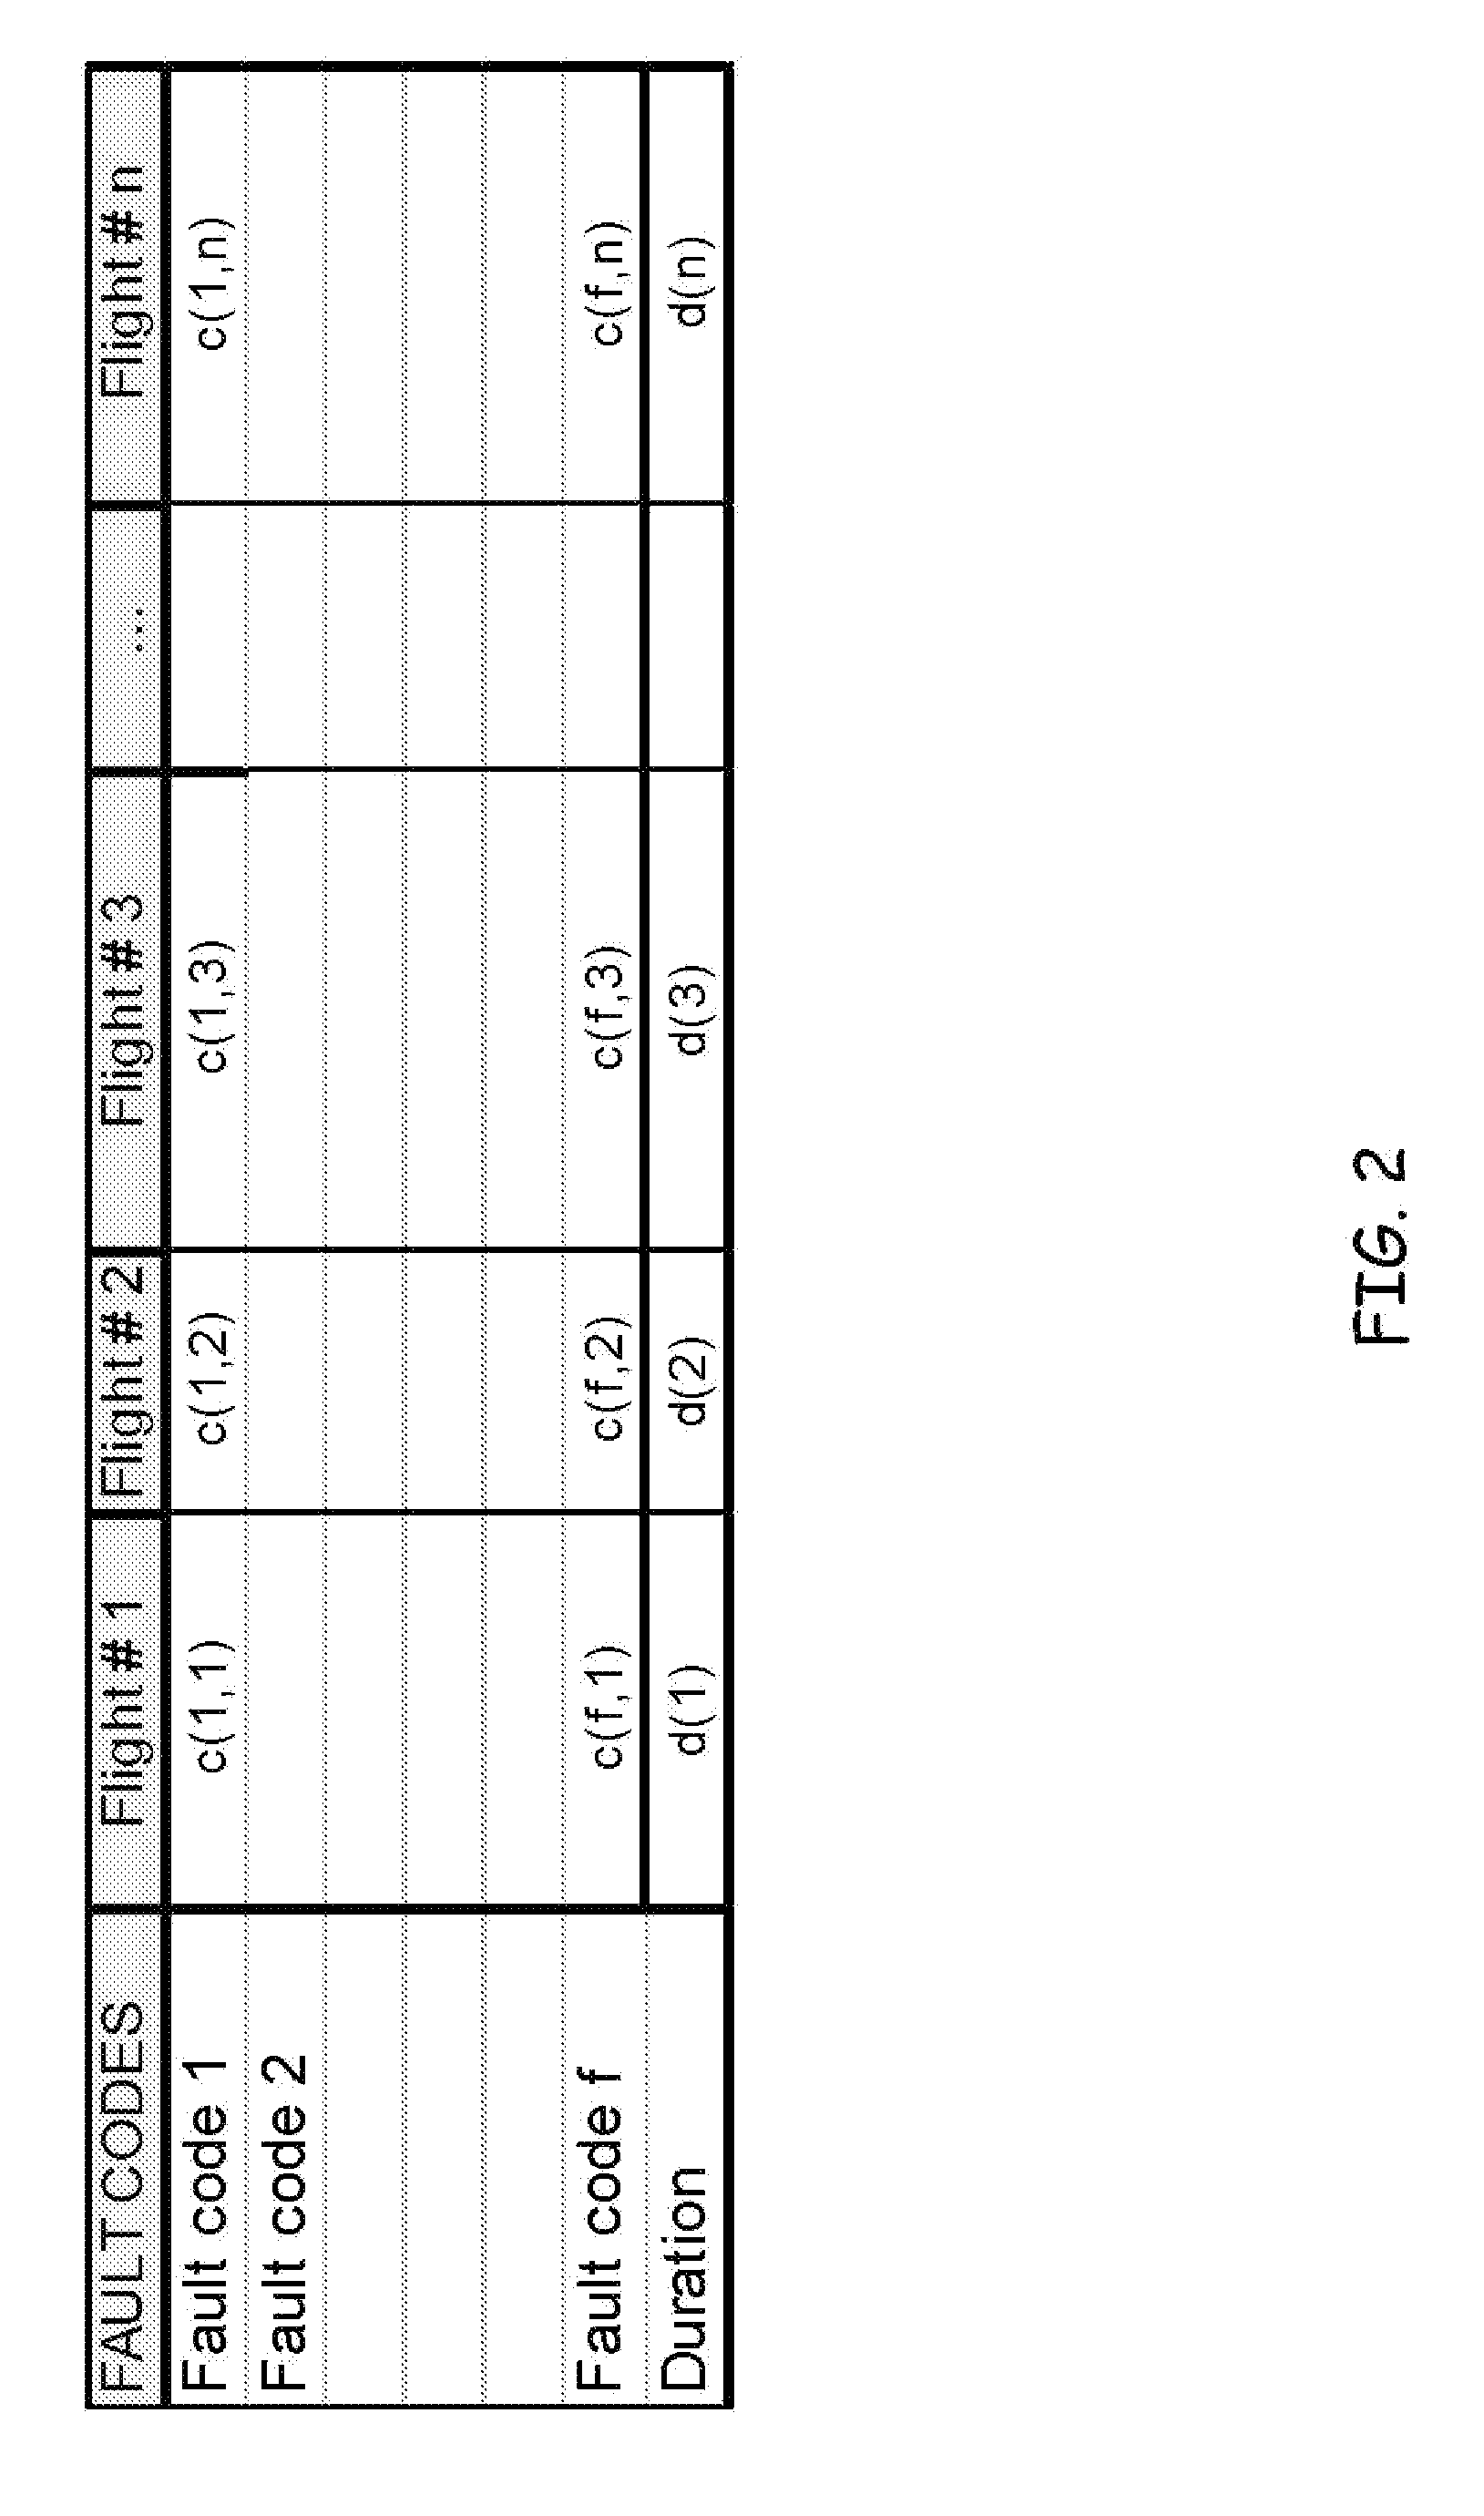 System and method for defining normal operating regions and identifying anomalous behavior of units within a fleet, operating in a complex, dynamic environment